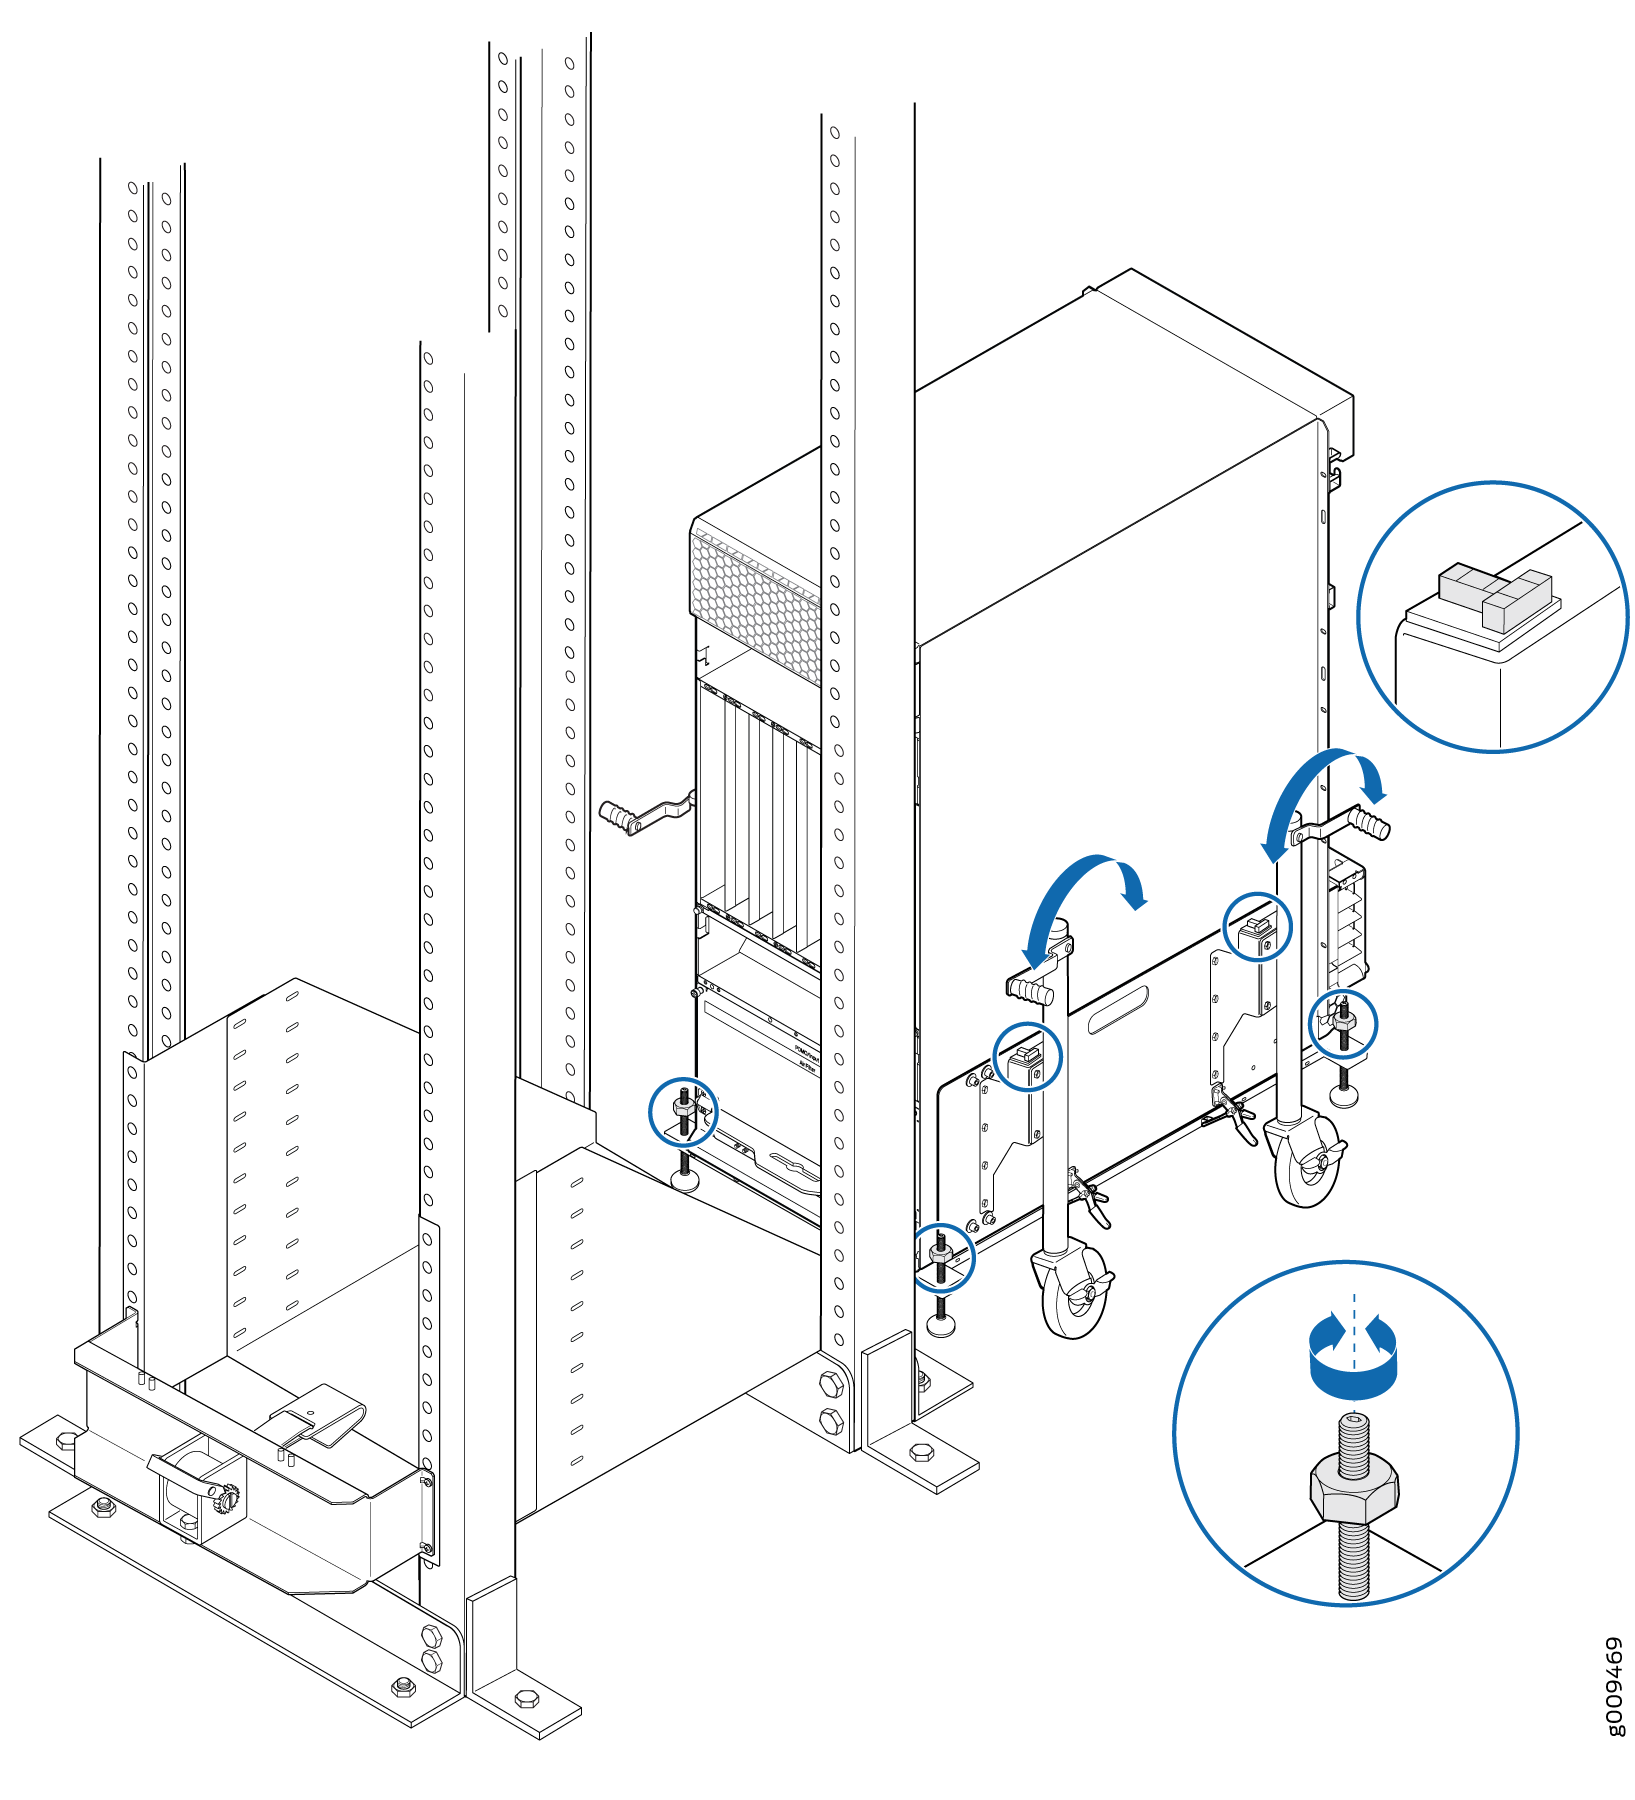 Align the MX2008 Router with Rack Mounting Shelf